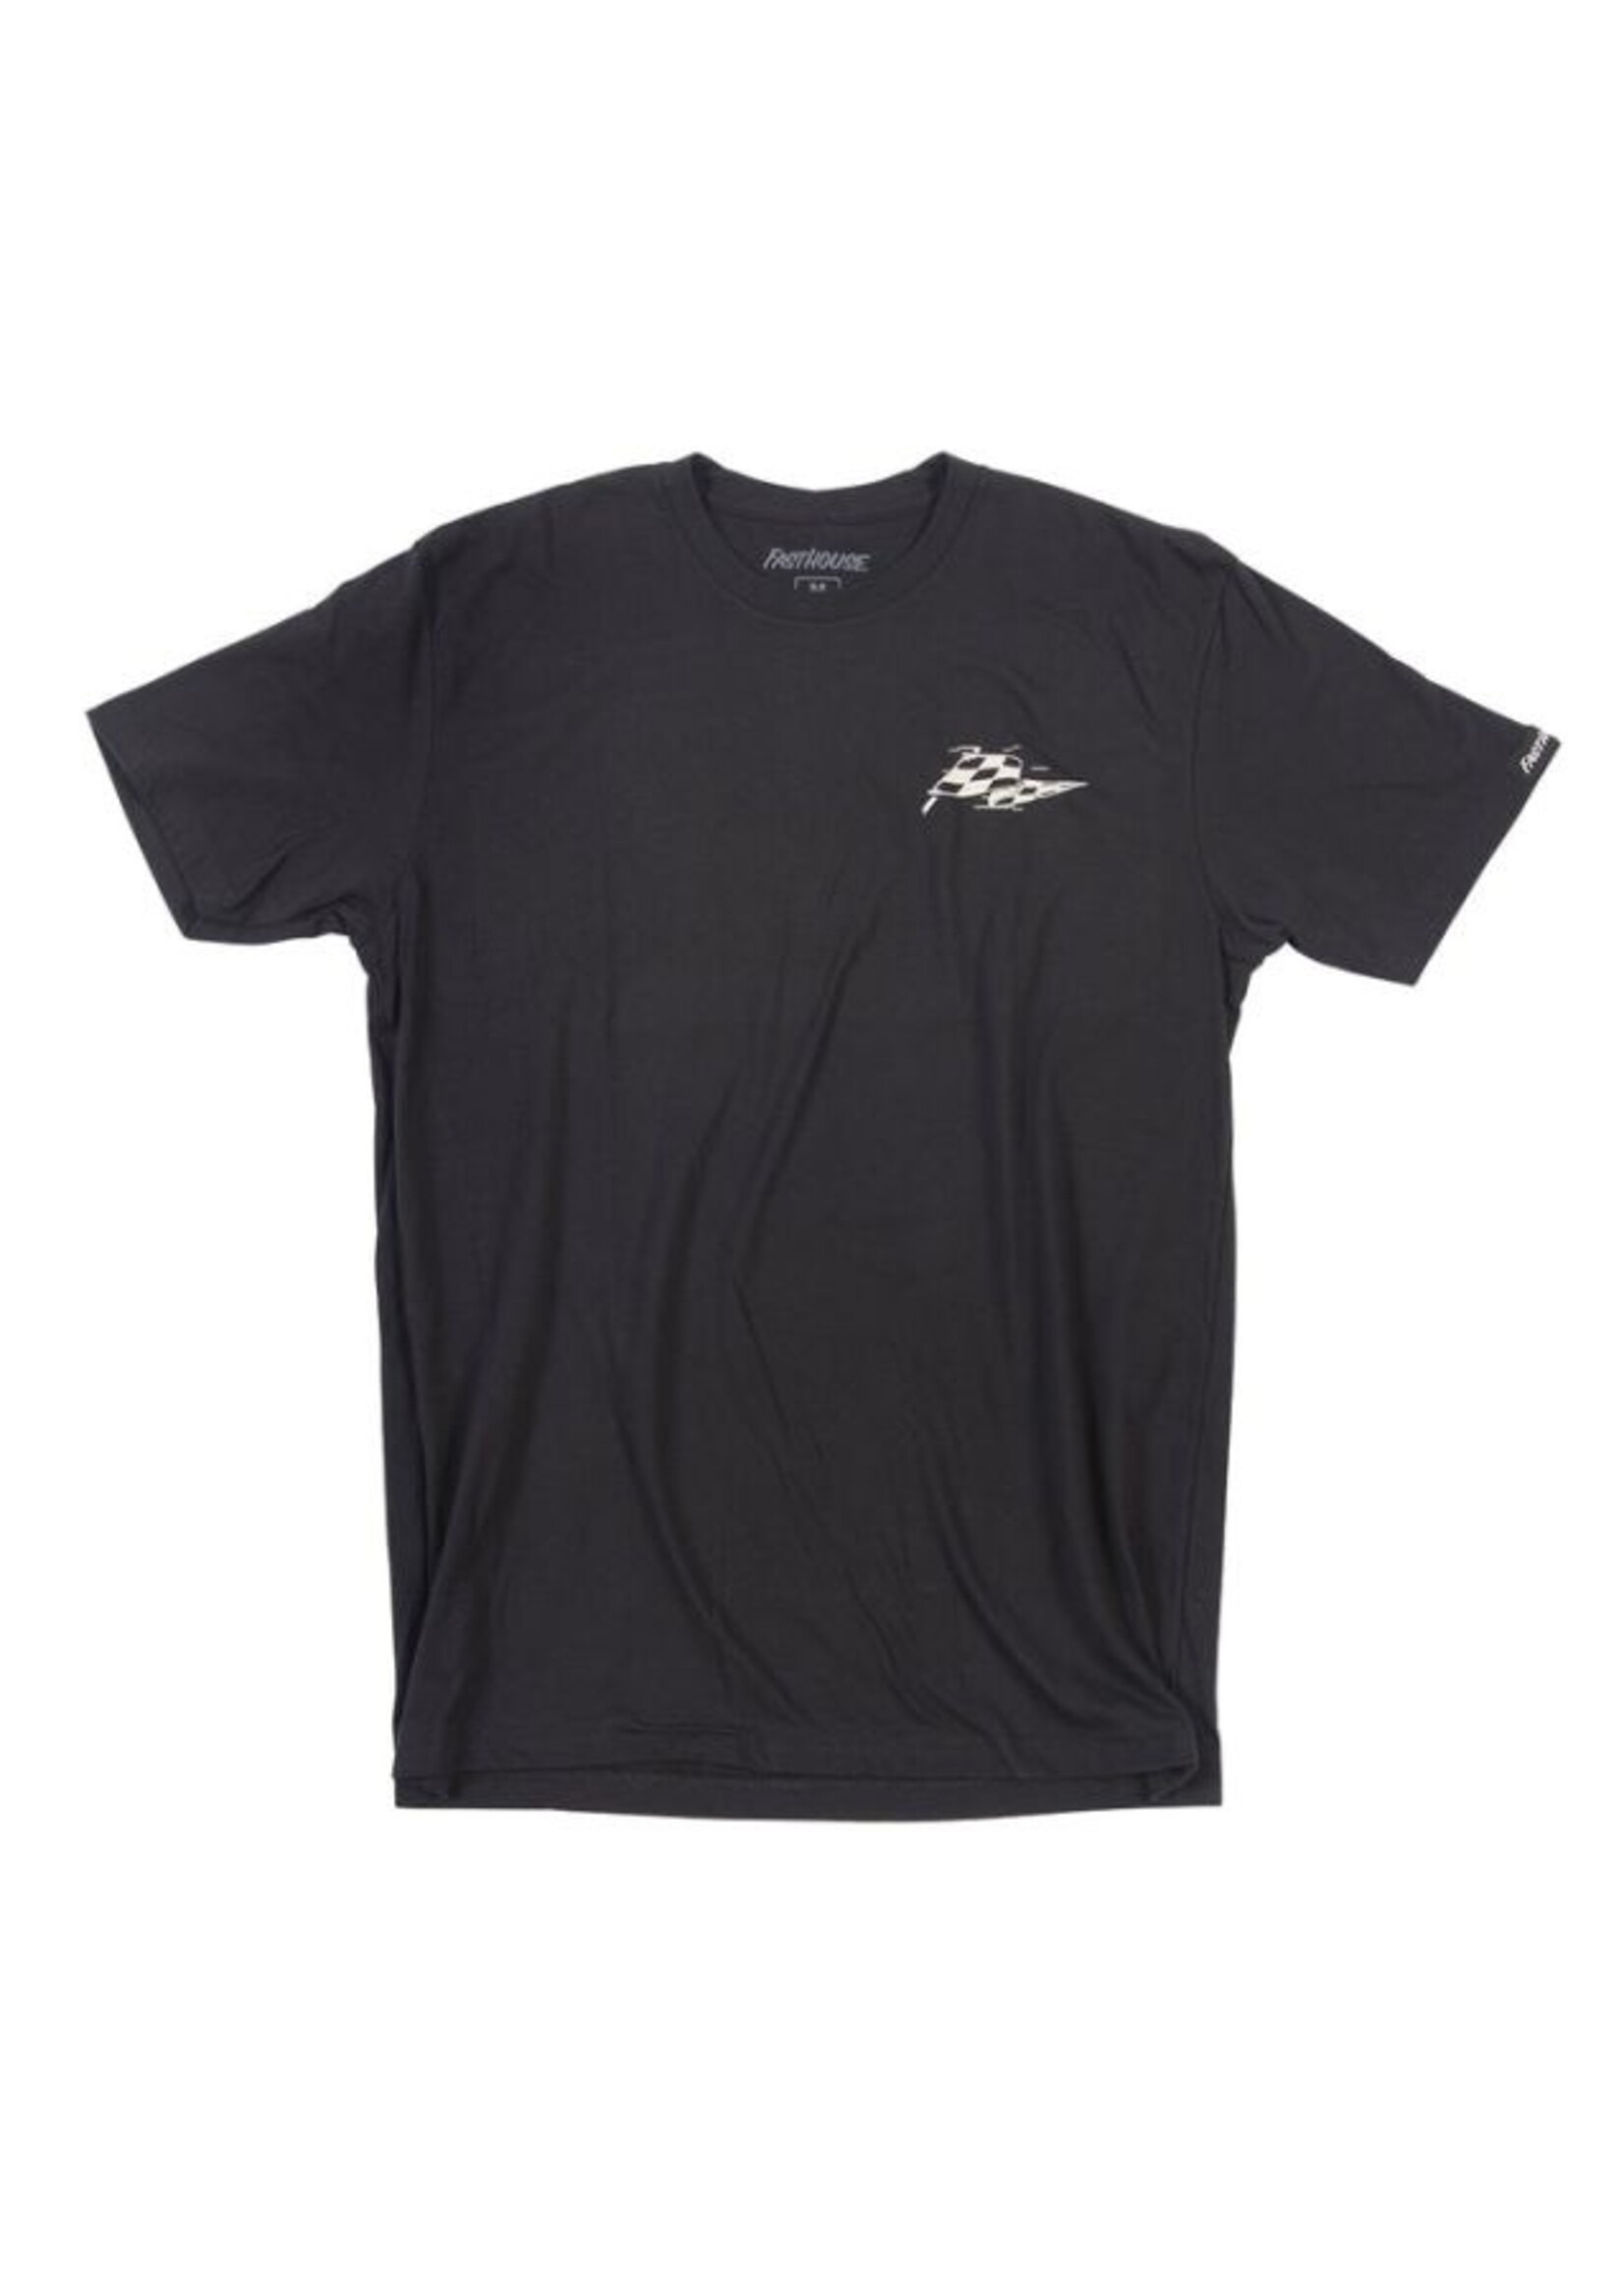 Fasthouse FASTHOUSE Sprinter Tee